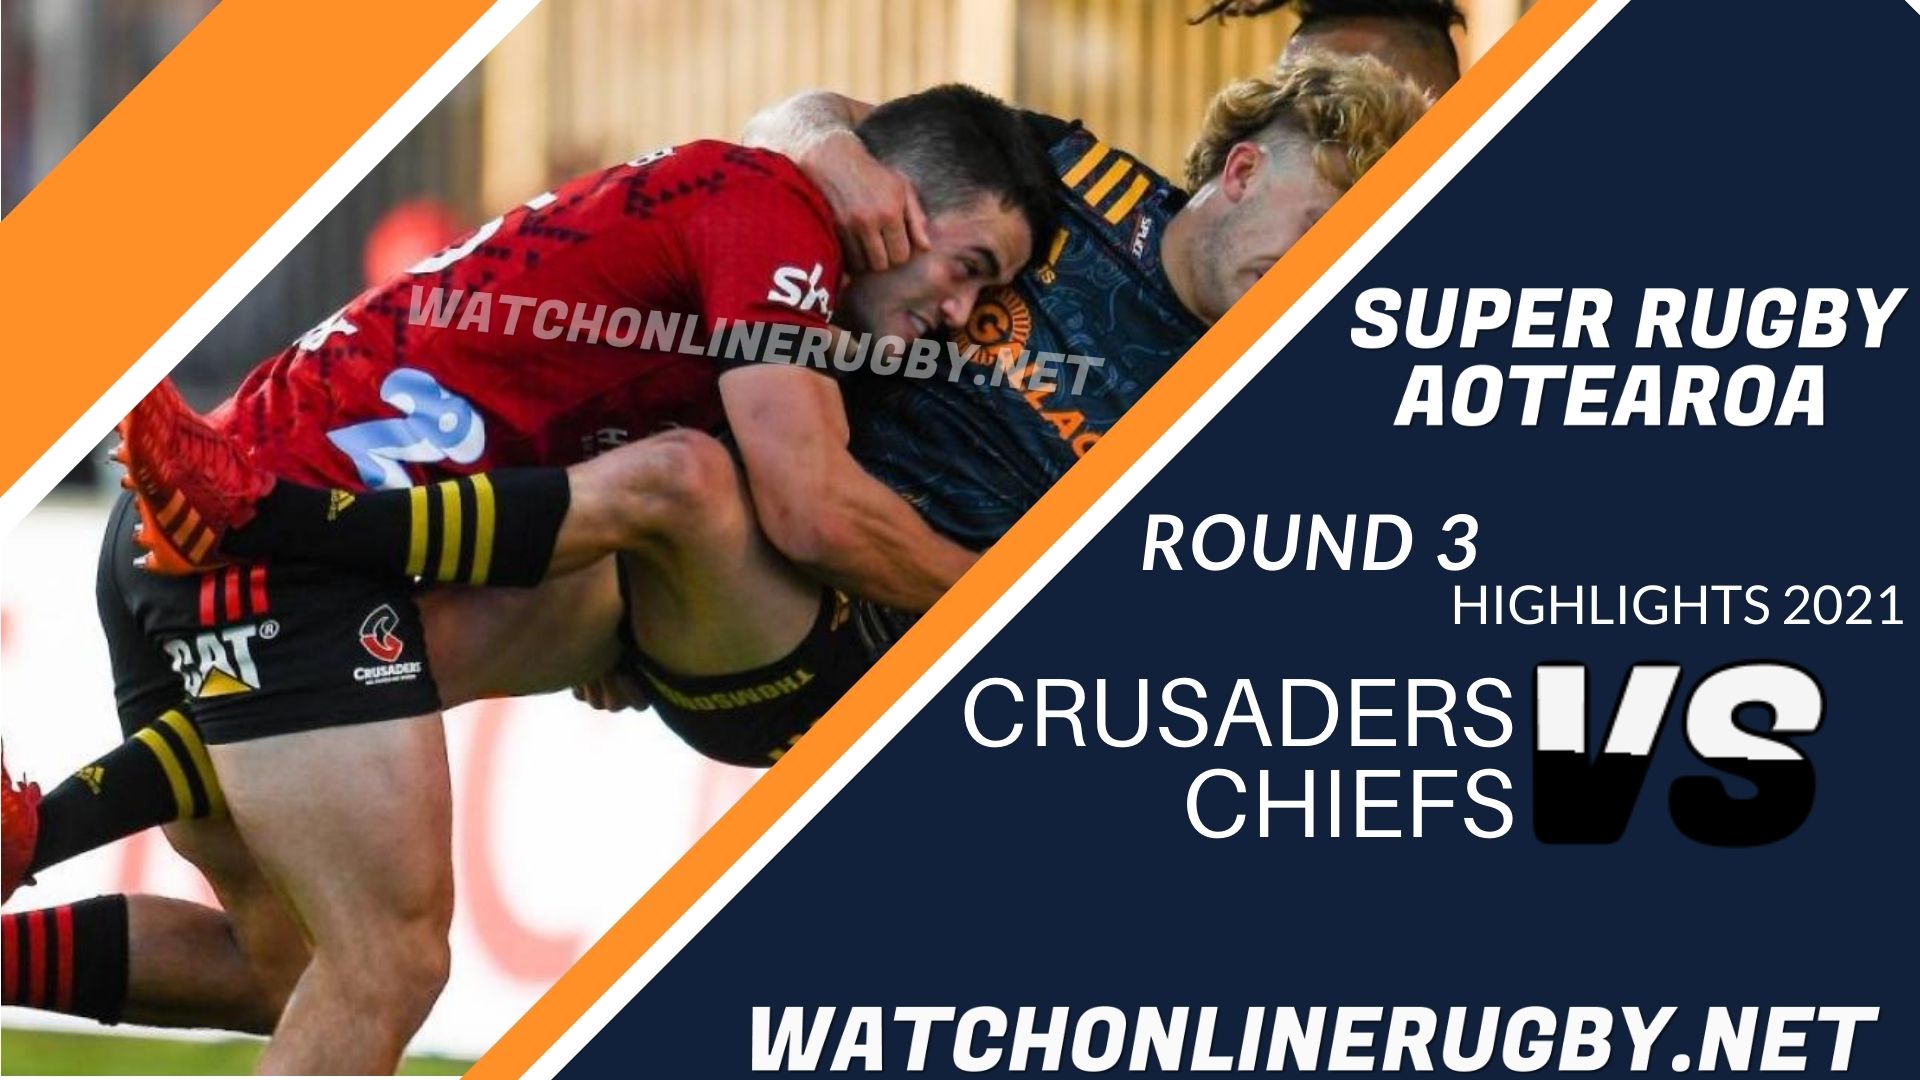 Crusaders Vs Chiefs Super Rugby Aotearoa 2021 RD 3